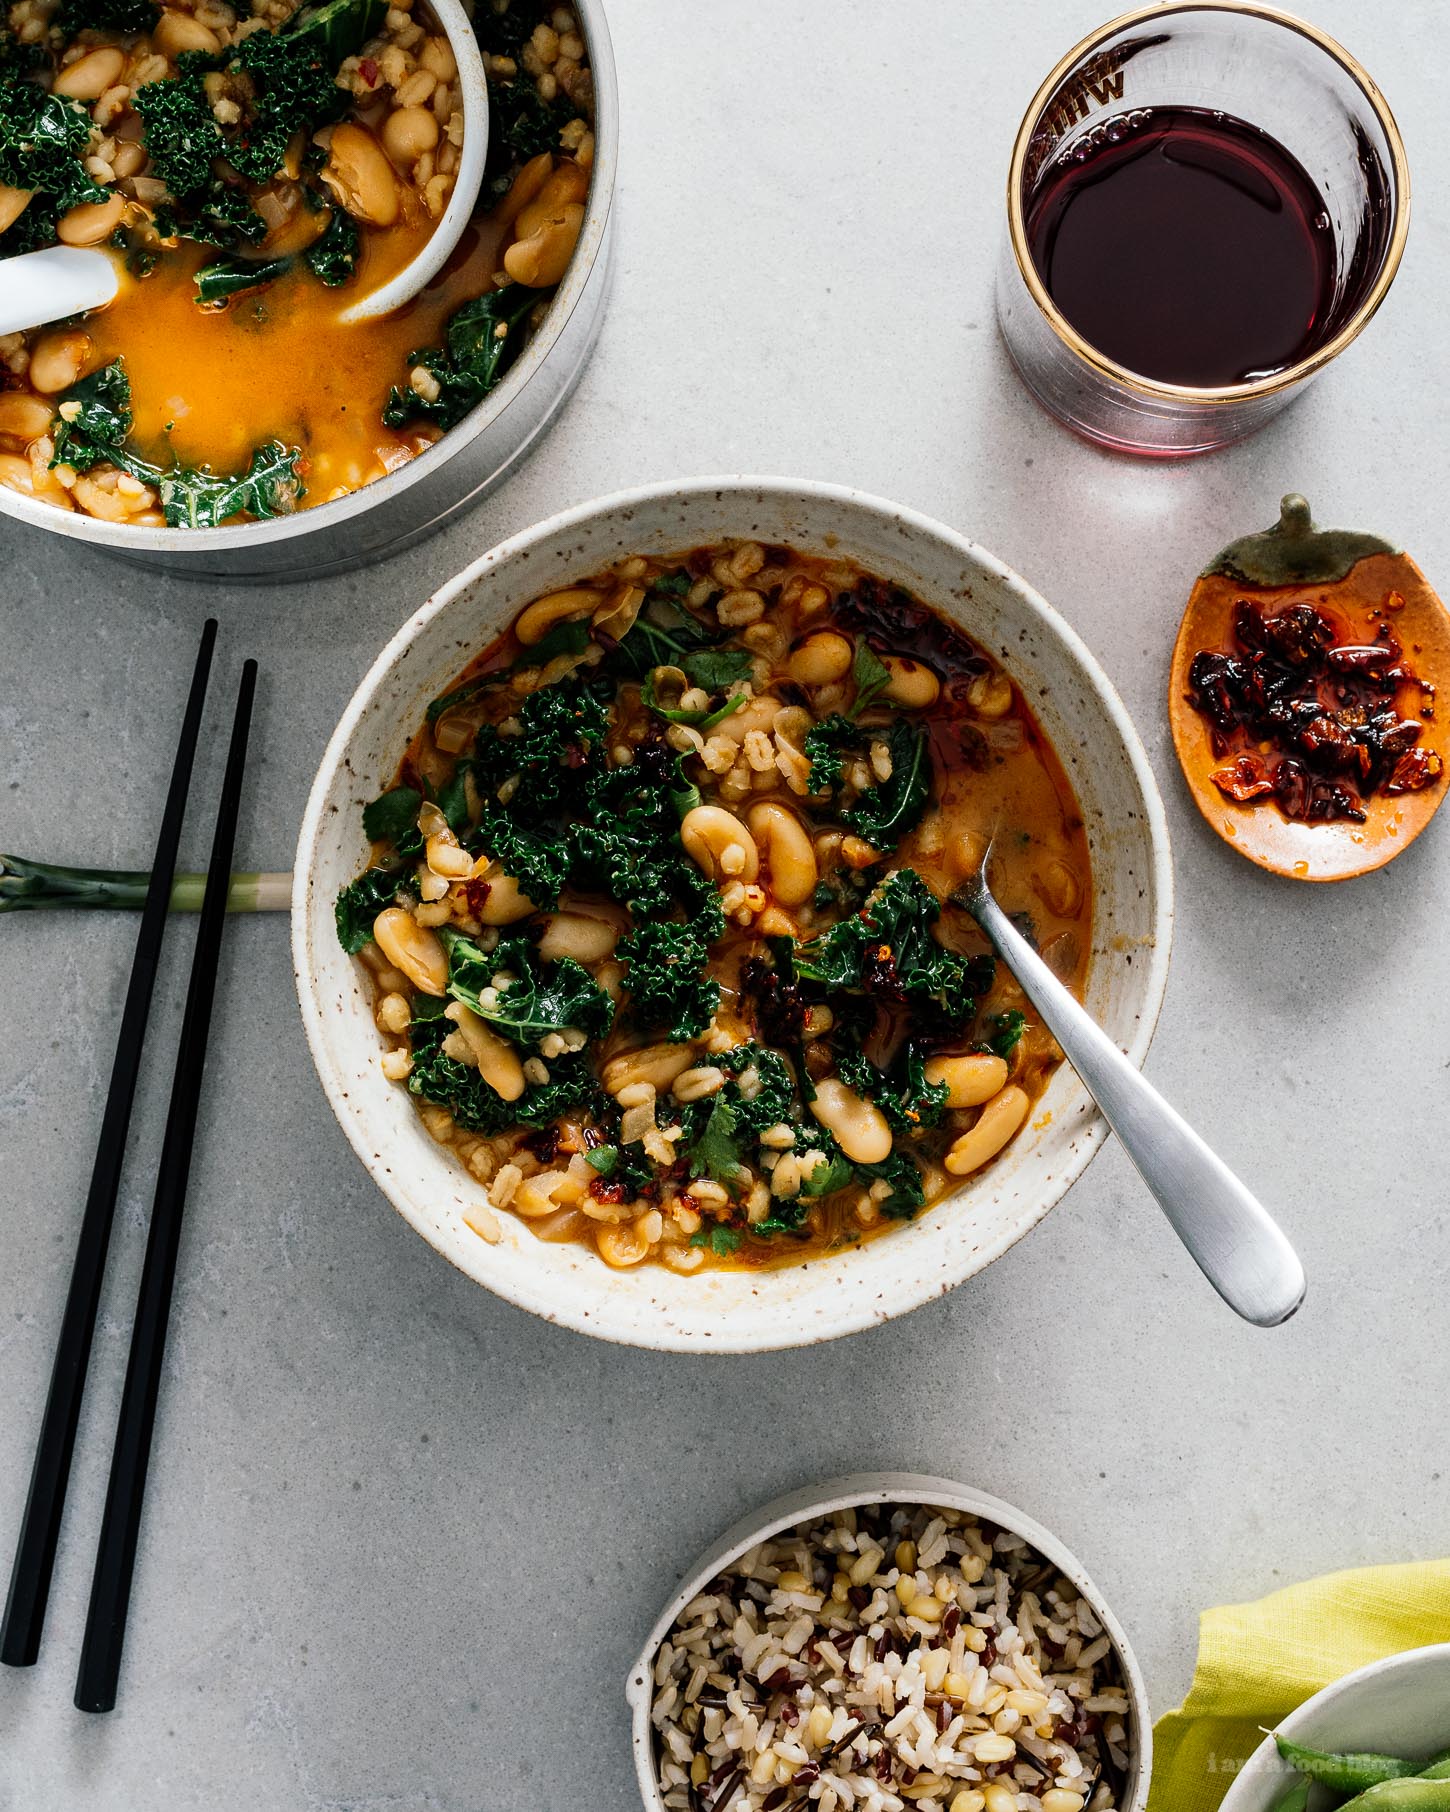 Spicy Chili Crisp White Bean and Barley Stew with Kale and Eggs | www.iamafoodblog.com